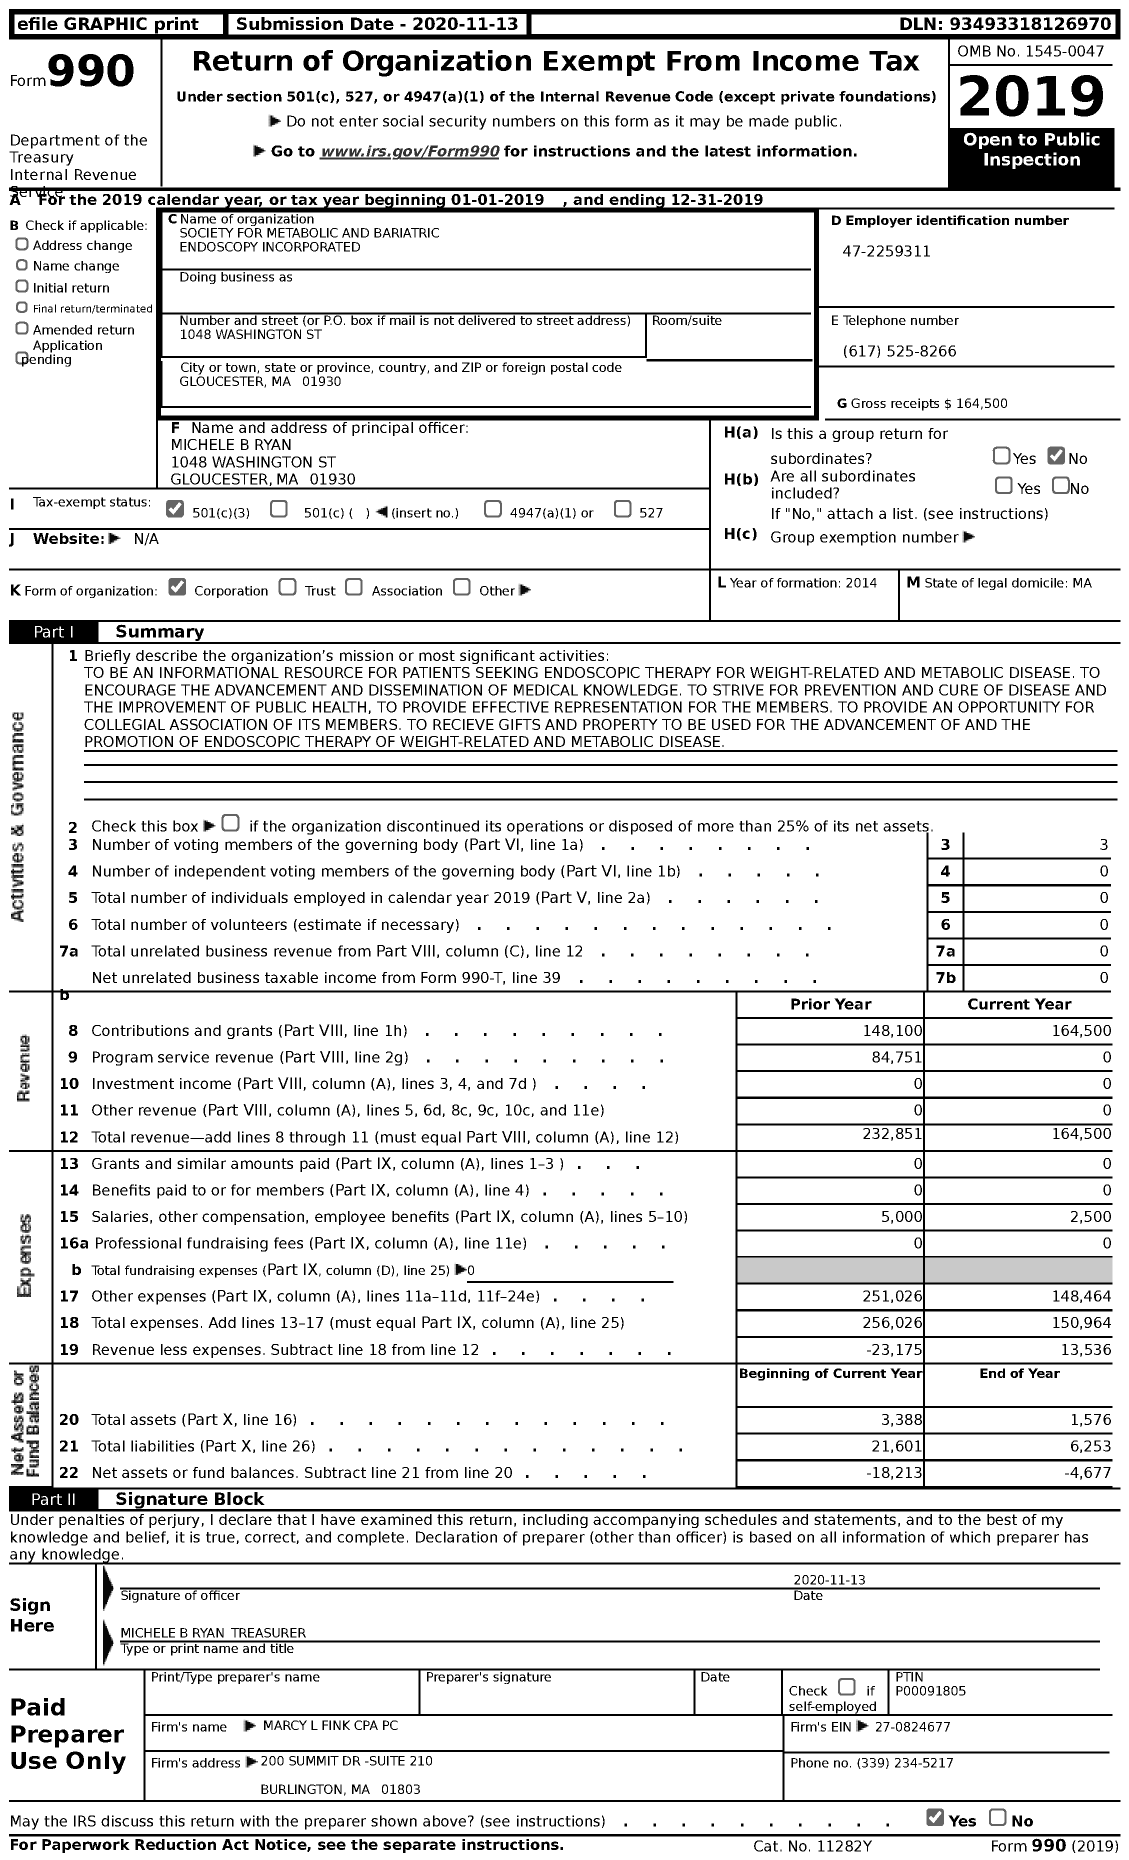 Image of first page of 2019 Form 990 for Society for Metabolic and Bariatric Endoscopy Incorporated